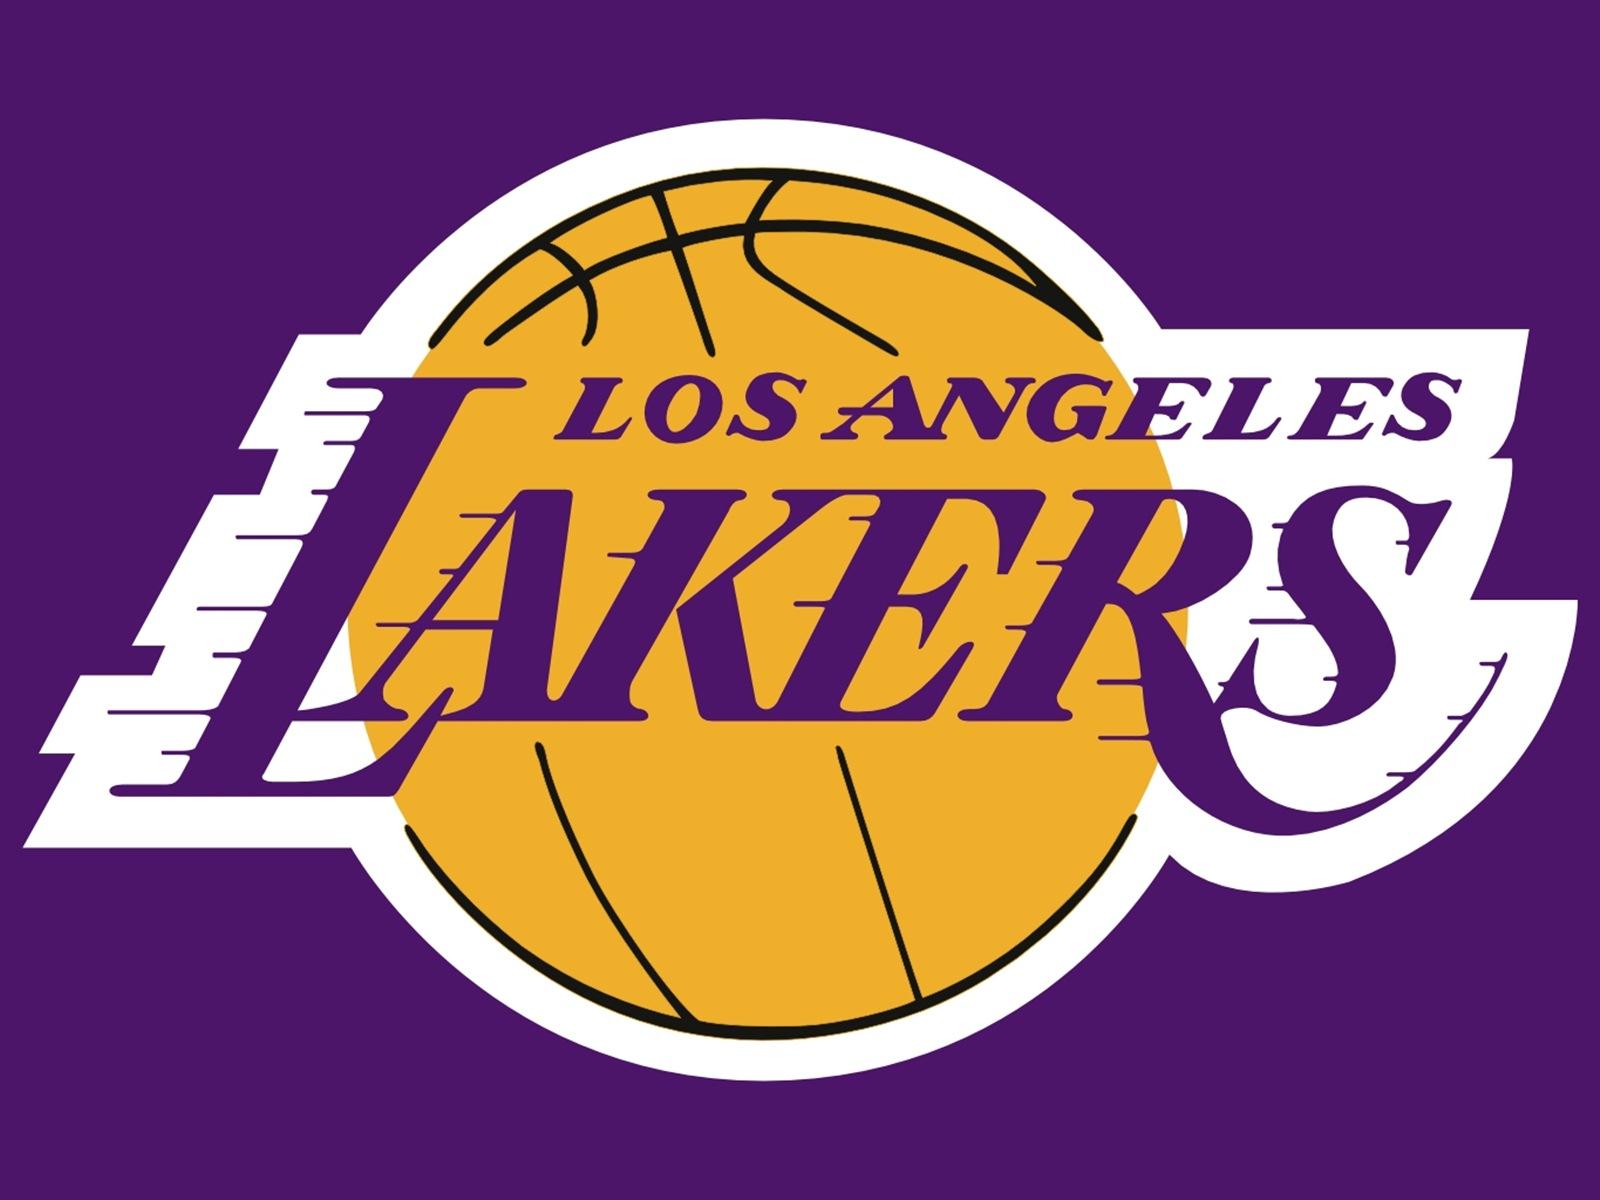 Los Angeles Lakers Logo - The Los Angeles Lakers logo without eyebrows : lakers